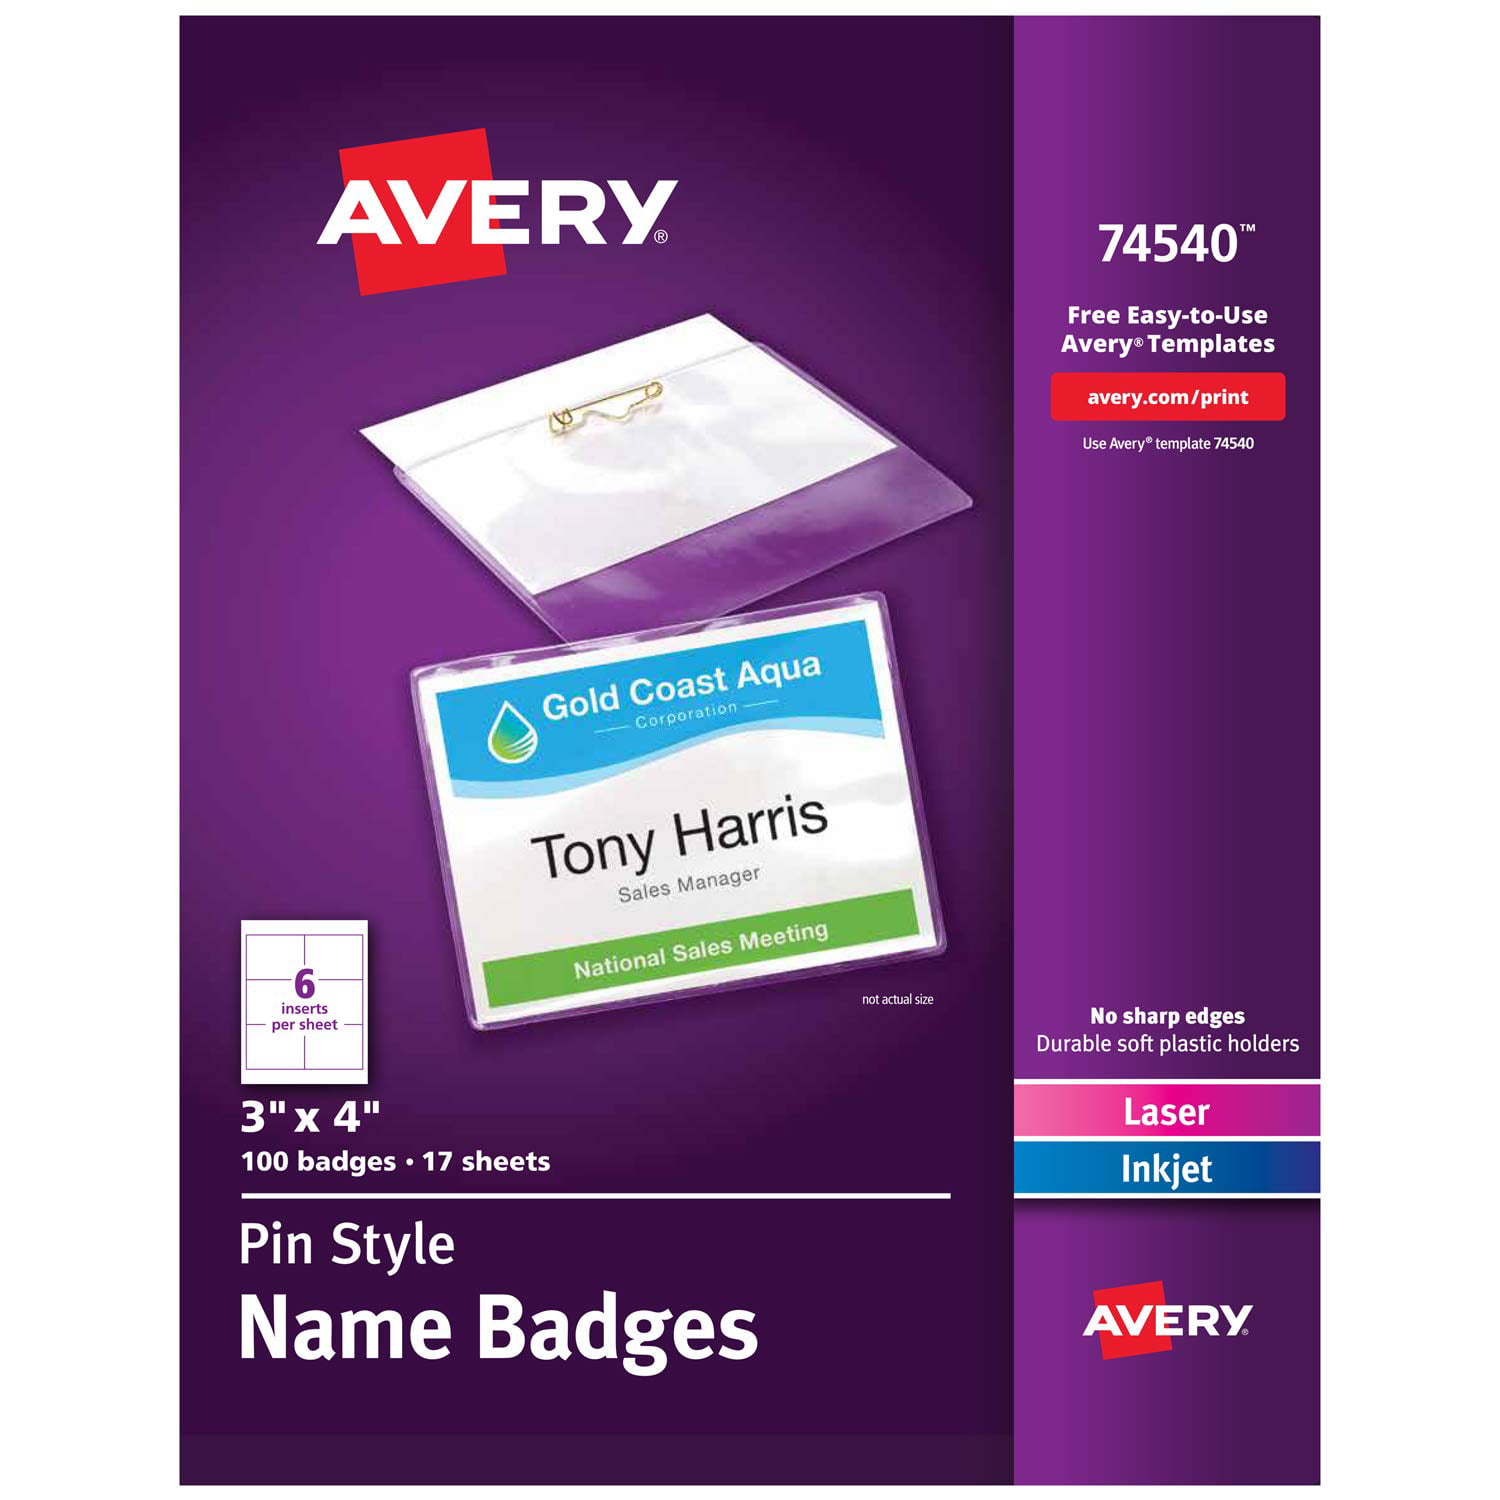 Pin Style Name Badges Print Or Write 3 X 4 Pins Securely 100 Inserts Pin Badge Holders White Durable Name Badges Securely Affix To By Avery Walmart Com Walmart Com